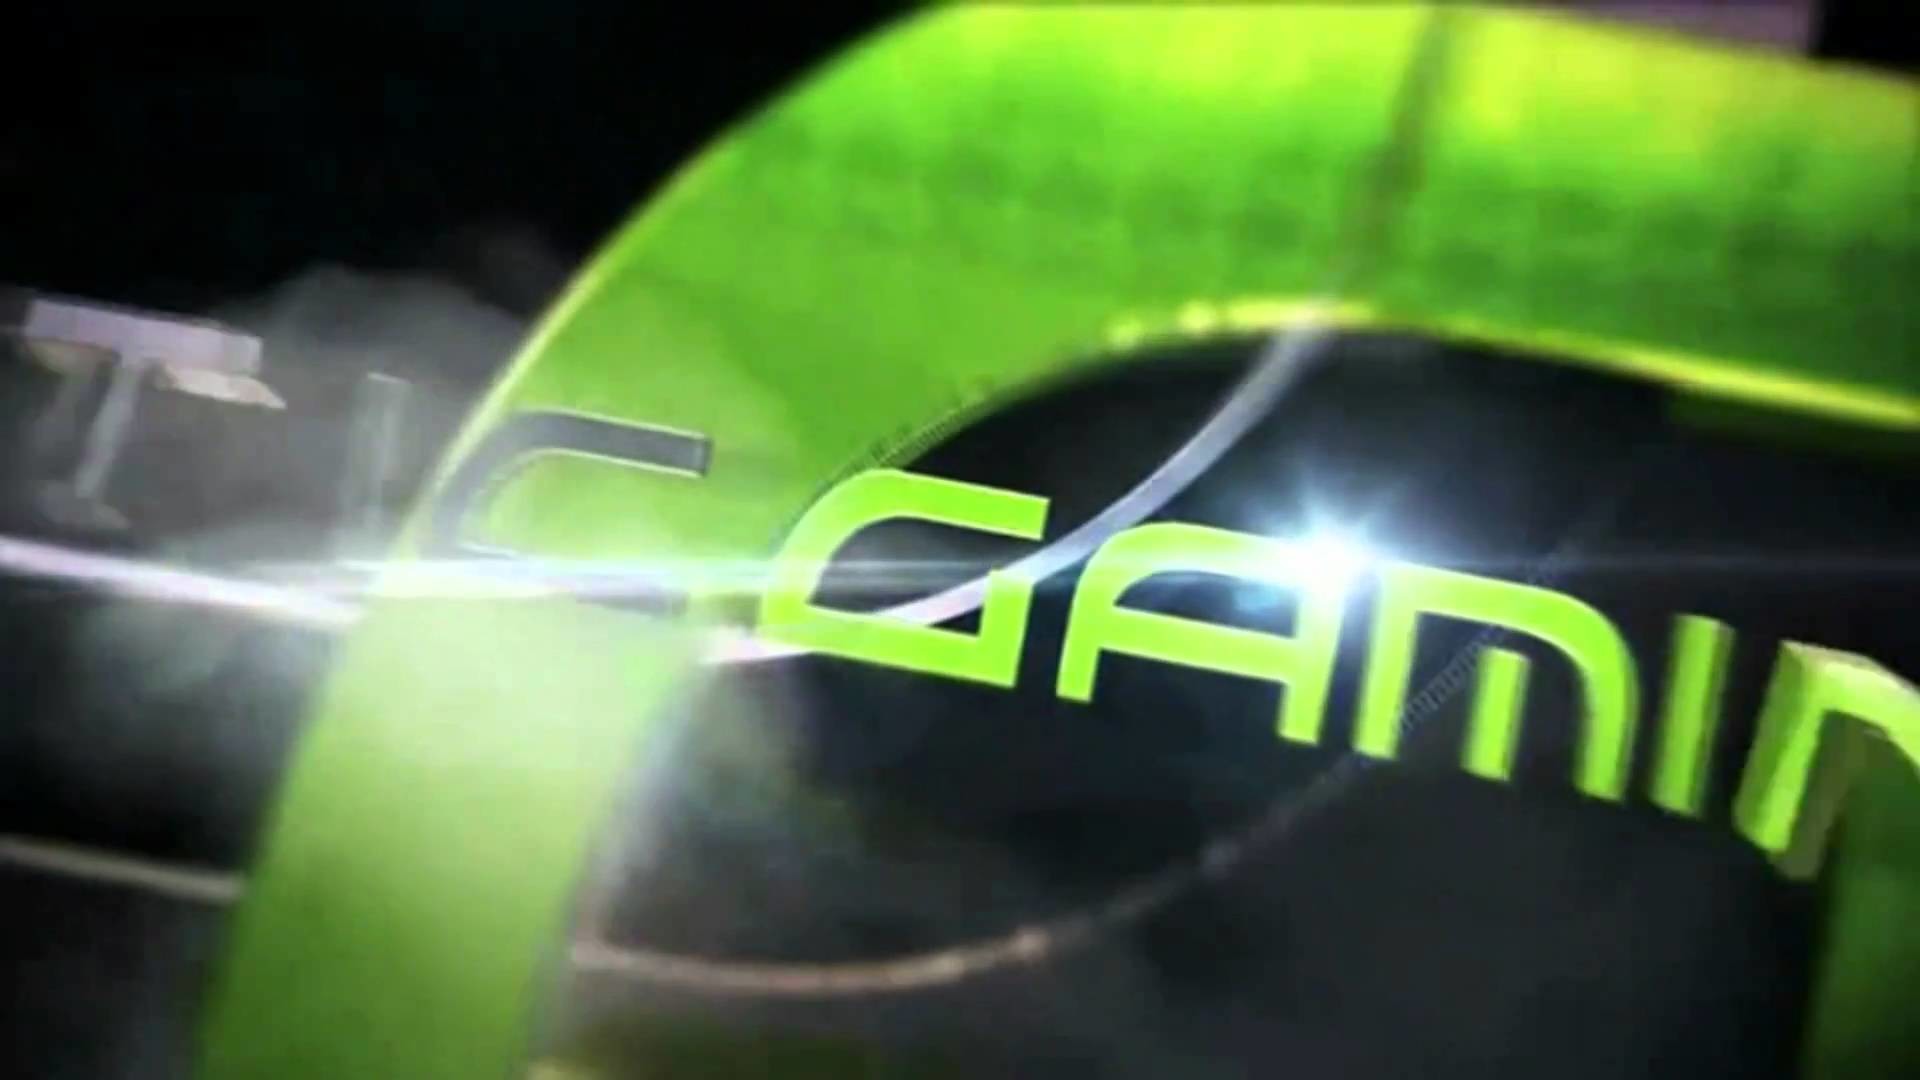 1920x1080 Game Wallpaper: Optic Gaming Green Wall Background Wallpaper For .